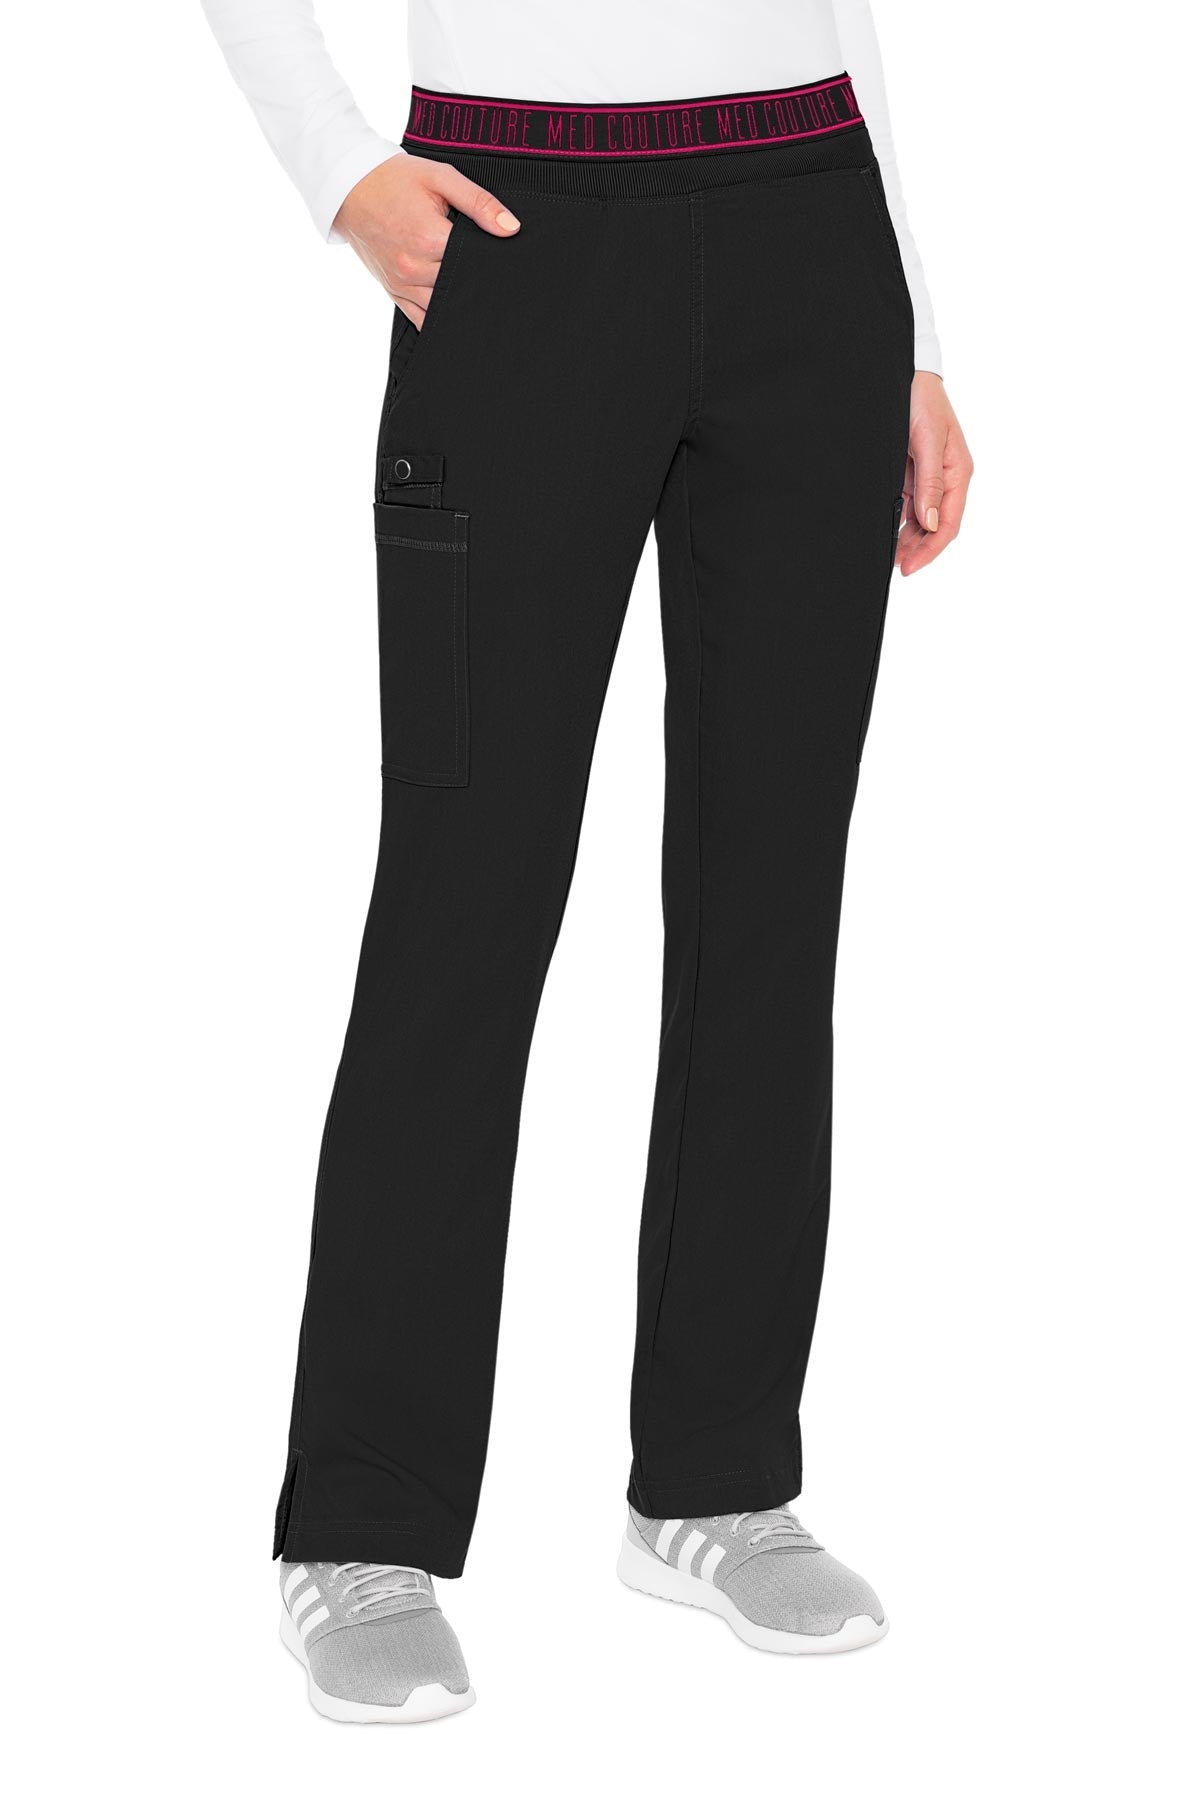 7725P Petite Med Couture Touch Yoga Waist Cargo Pants